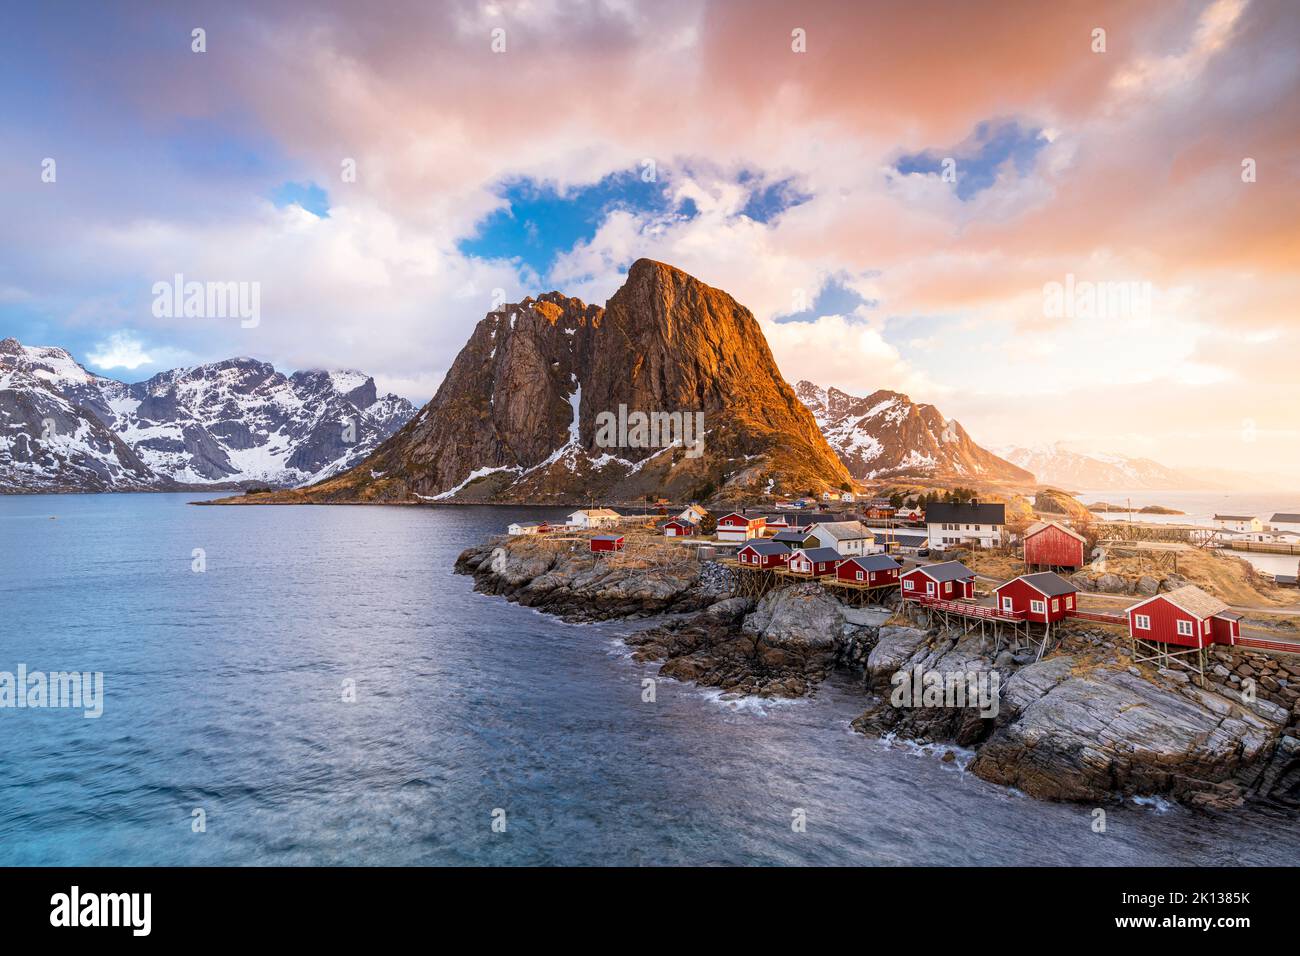 Clouds at sunrise over traditional Rorbu cottages on cliffs by the cold arctic sea, Hamnoy, Reine, Lofoten Islands, Norway, Europe Stock Photo